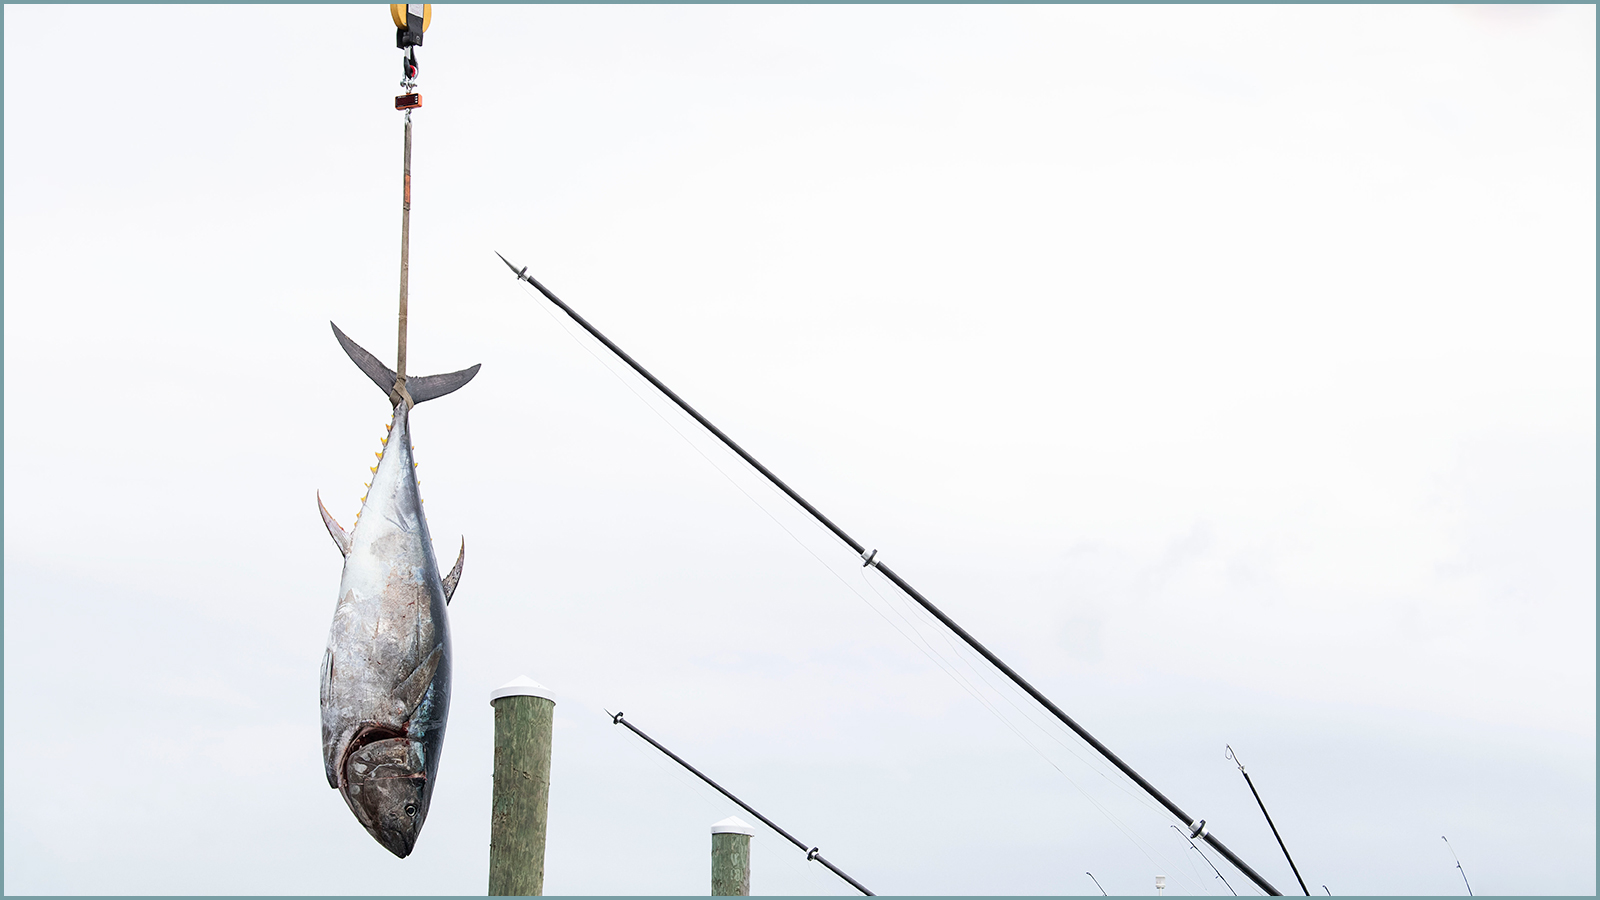 A single bluefin tuna hangs suspended, large fishing poles can also be seen